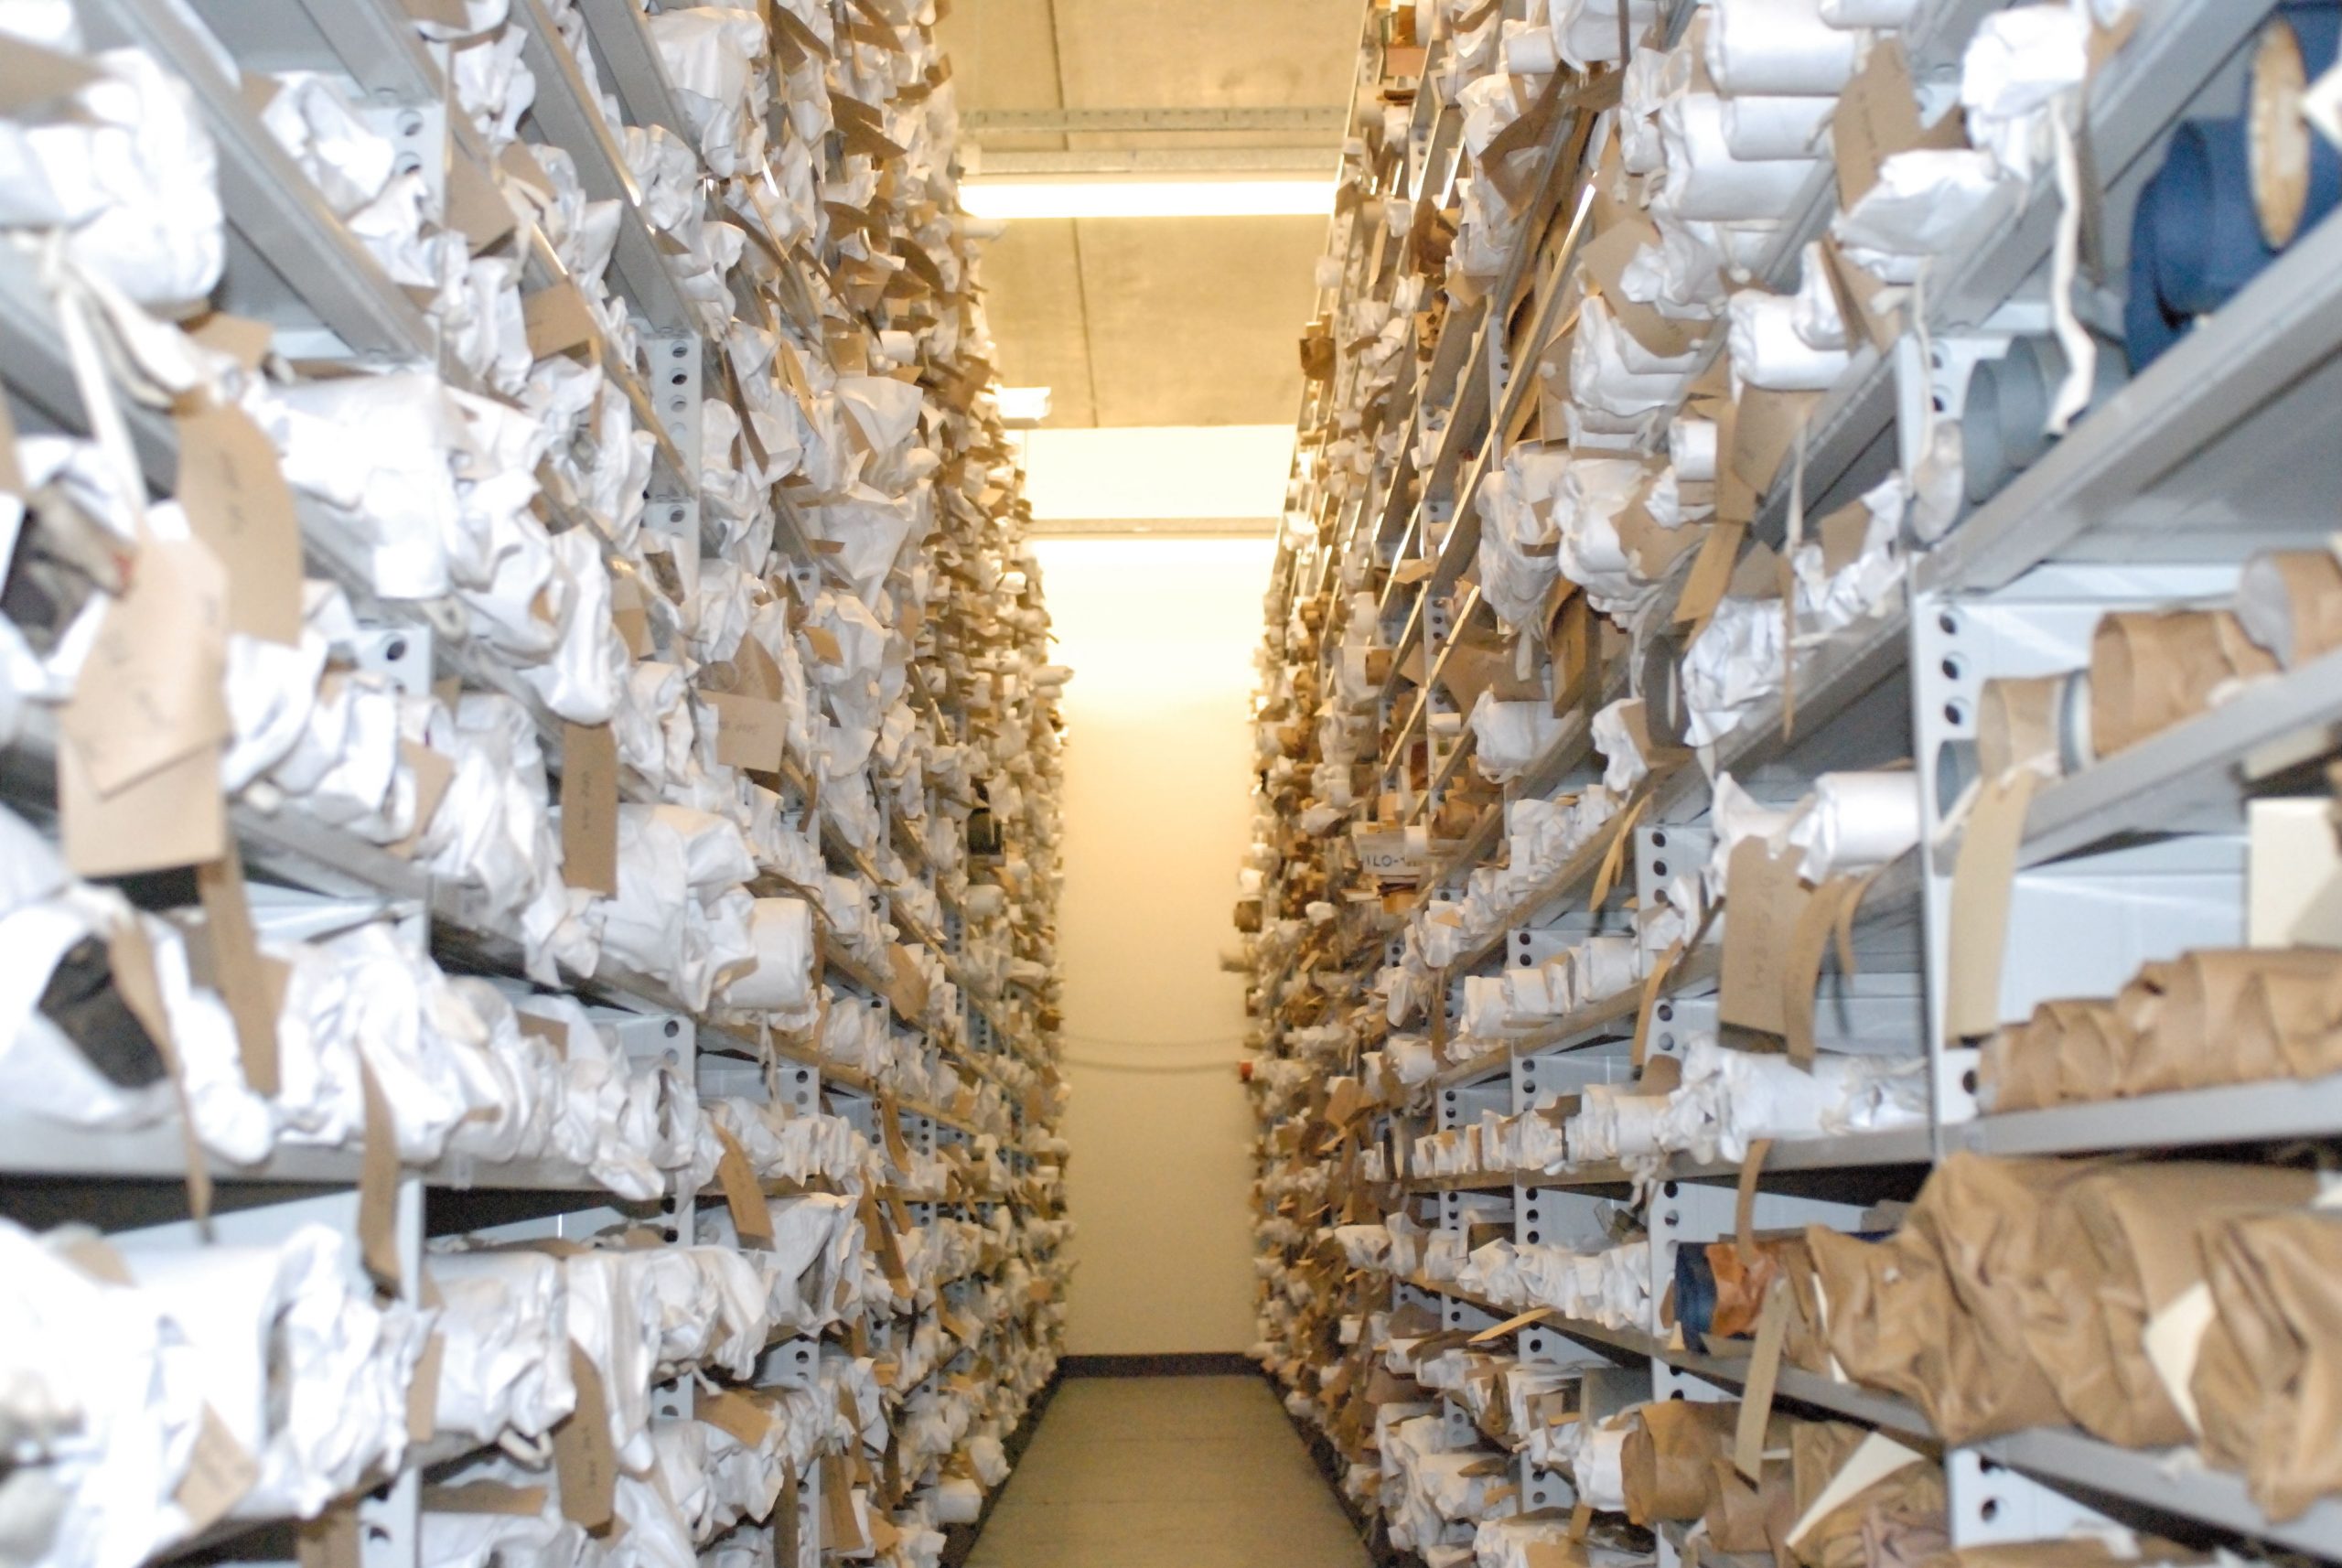 Documents Store at Woodhorn Archives